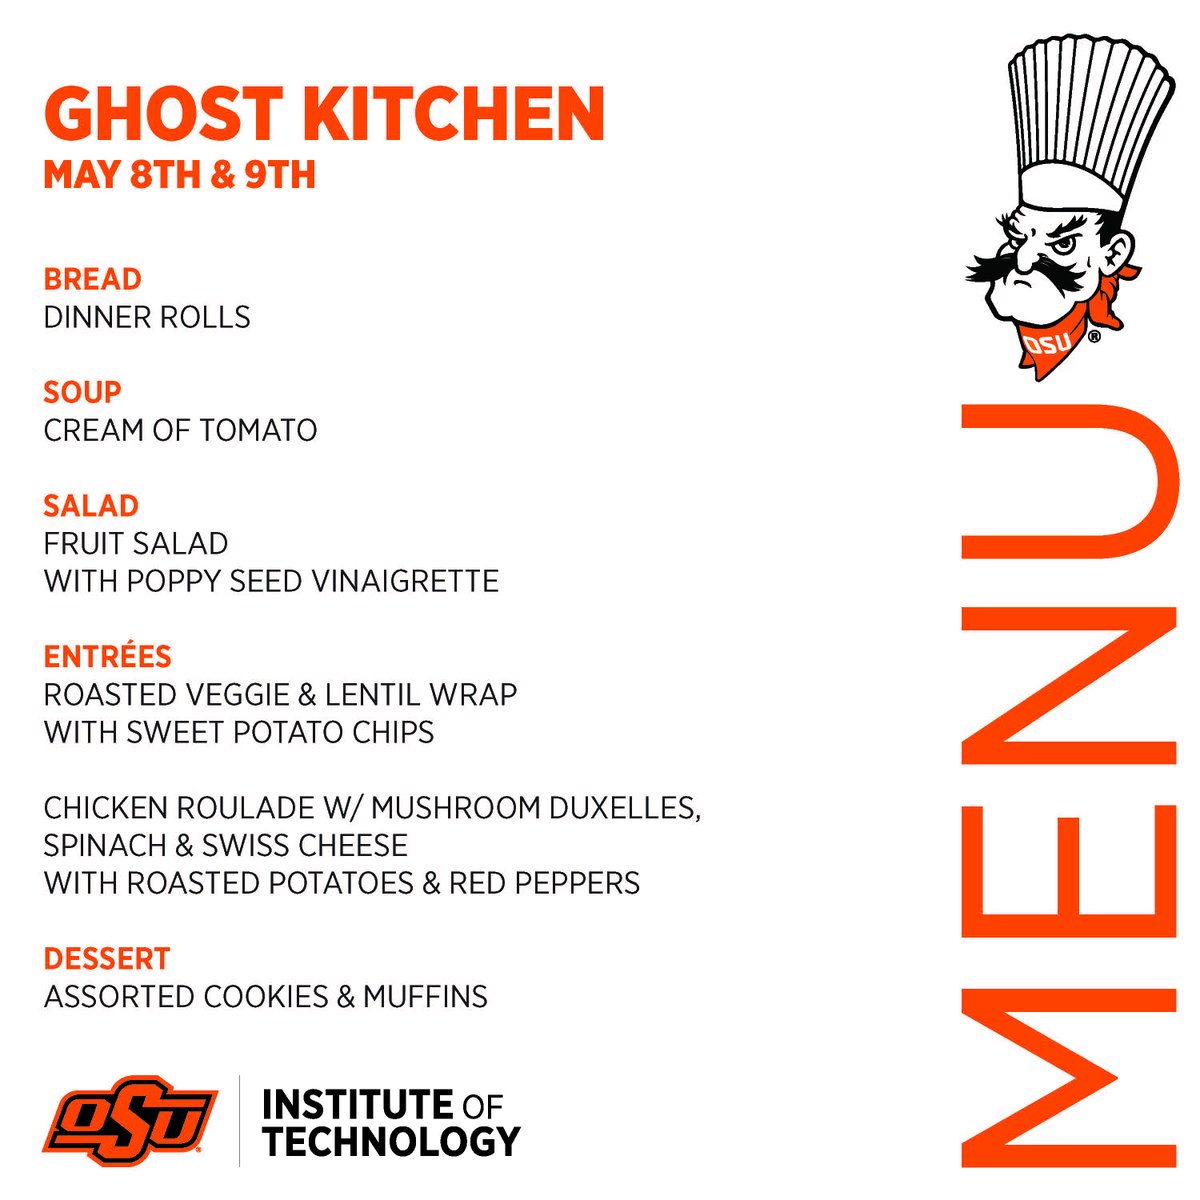 The Ghost Kitchen is back in action this week at OSUIT!

Join us for a convenient grab-and-go lunch starting at 11am on Wednesday, May 8, and Thursday, May 9. We'll be serving up delicious meals in the Culinary Arts State Room. Drop by—no reservations needed! #OSUIT #CulinaryArts